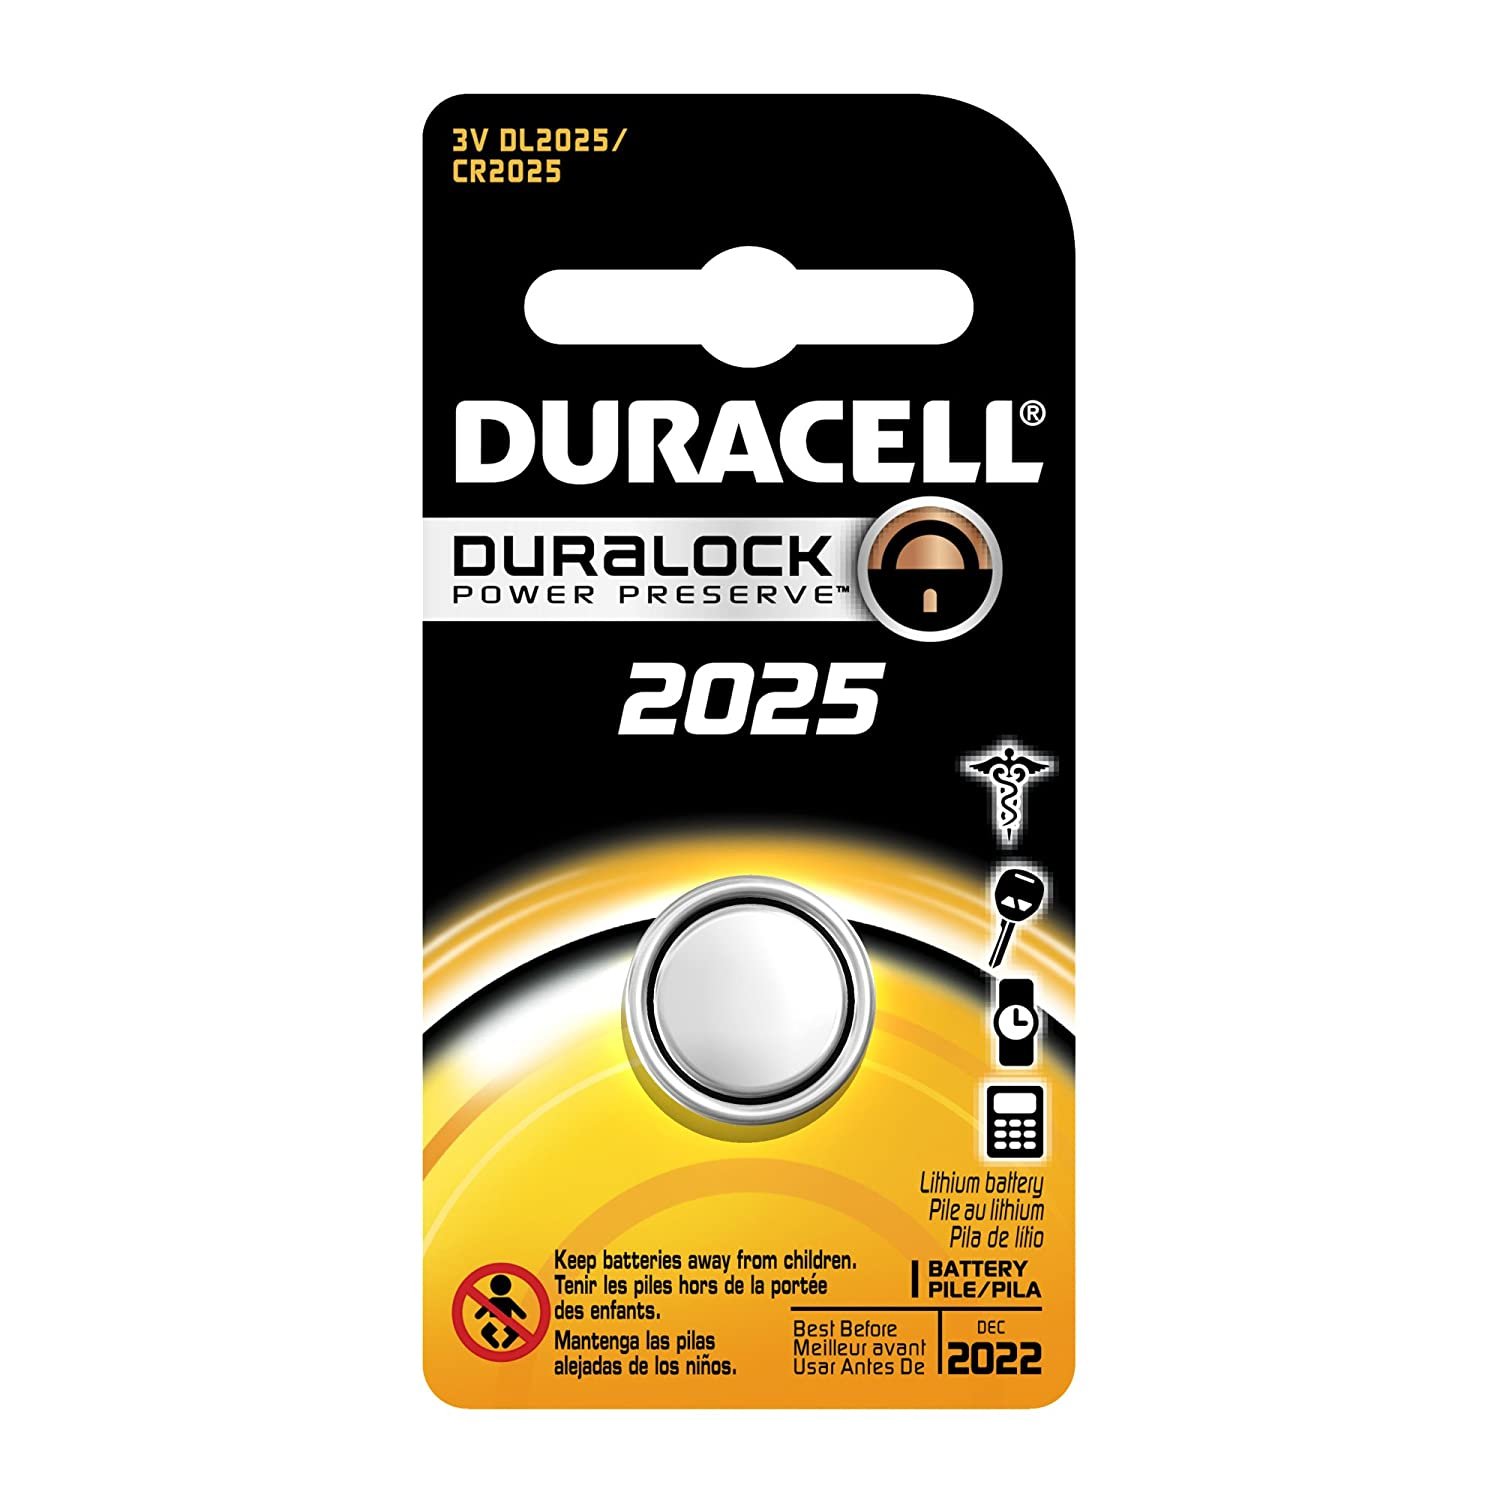 Duracell Dl2032 Lithium Coin Battery 2032 Size 3V 230 mAh Capacity (Case of 6)